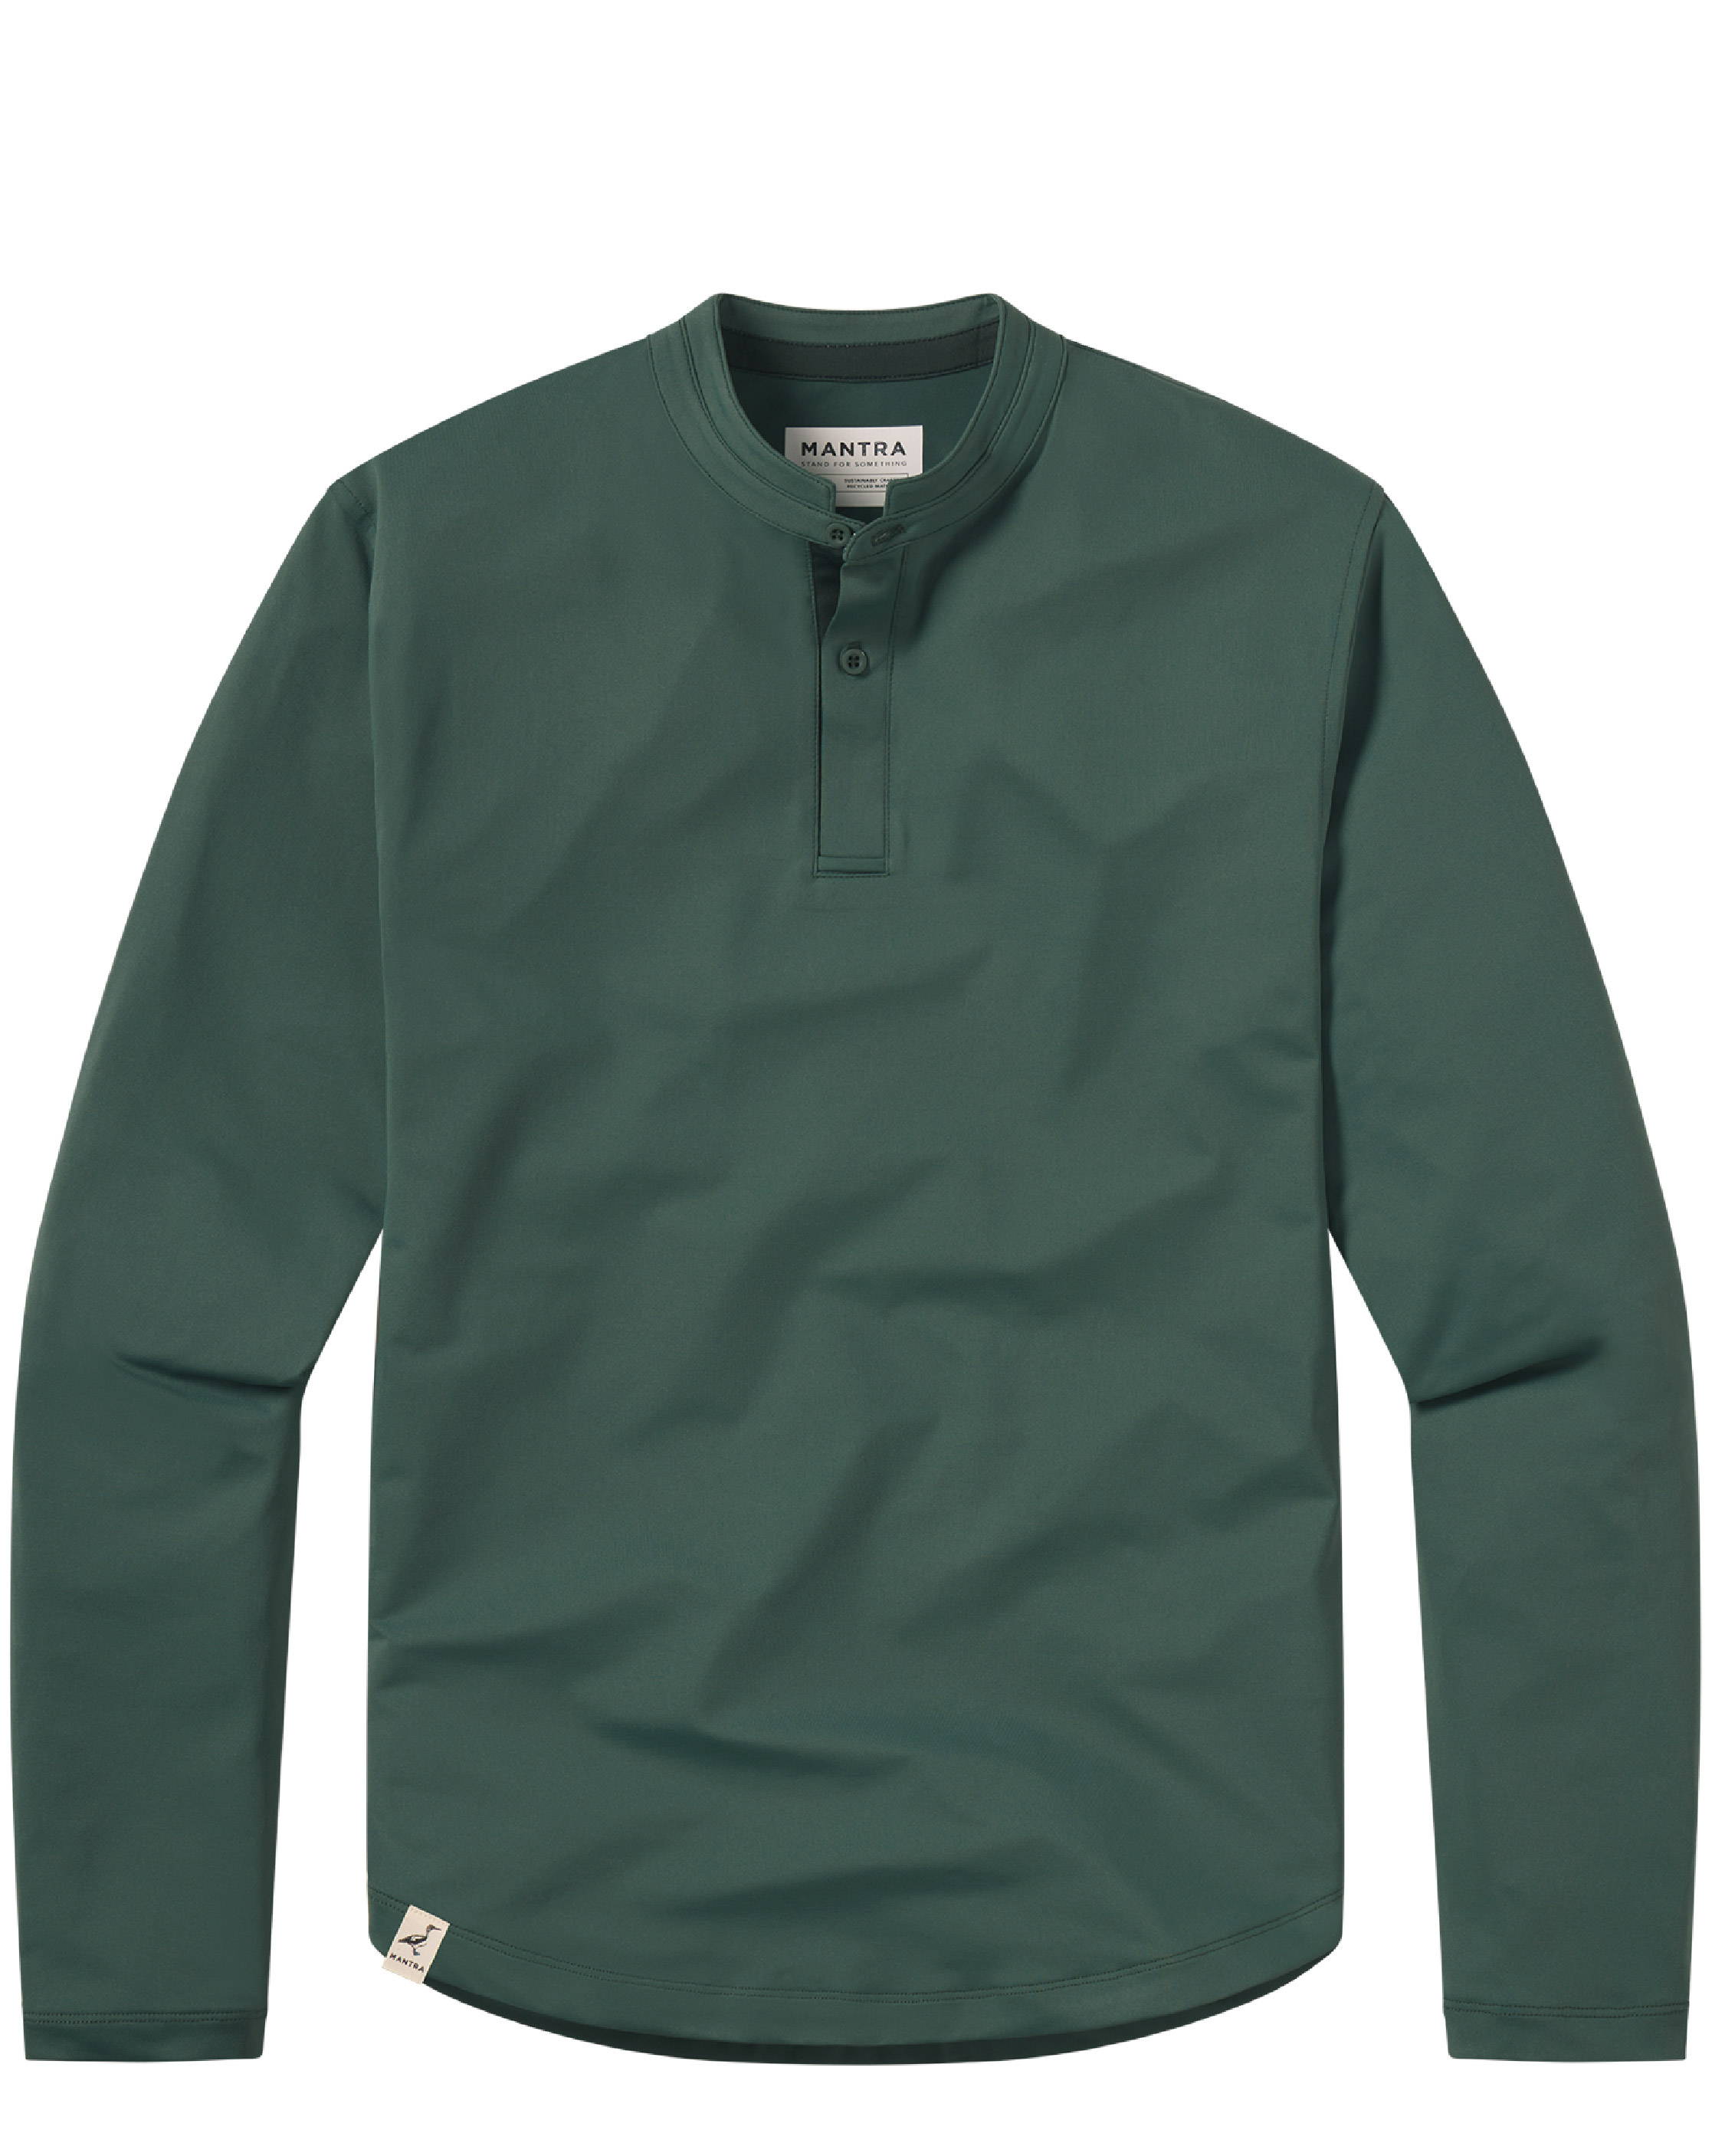 MANTRA TREELINE L/S Polo - sustainable mens performance polo made from recycled materials